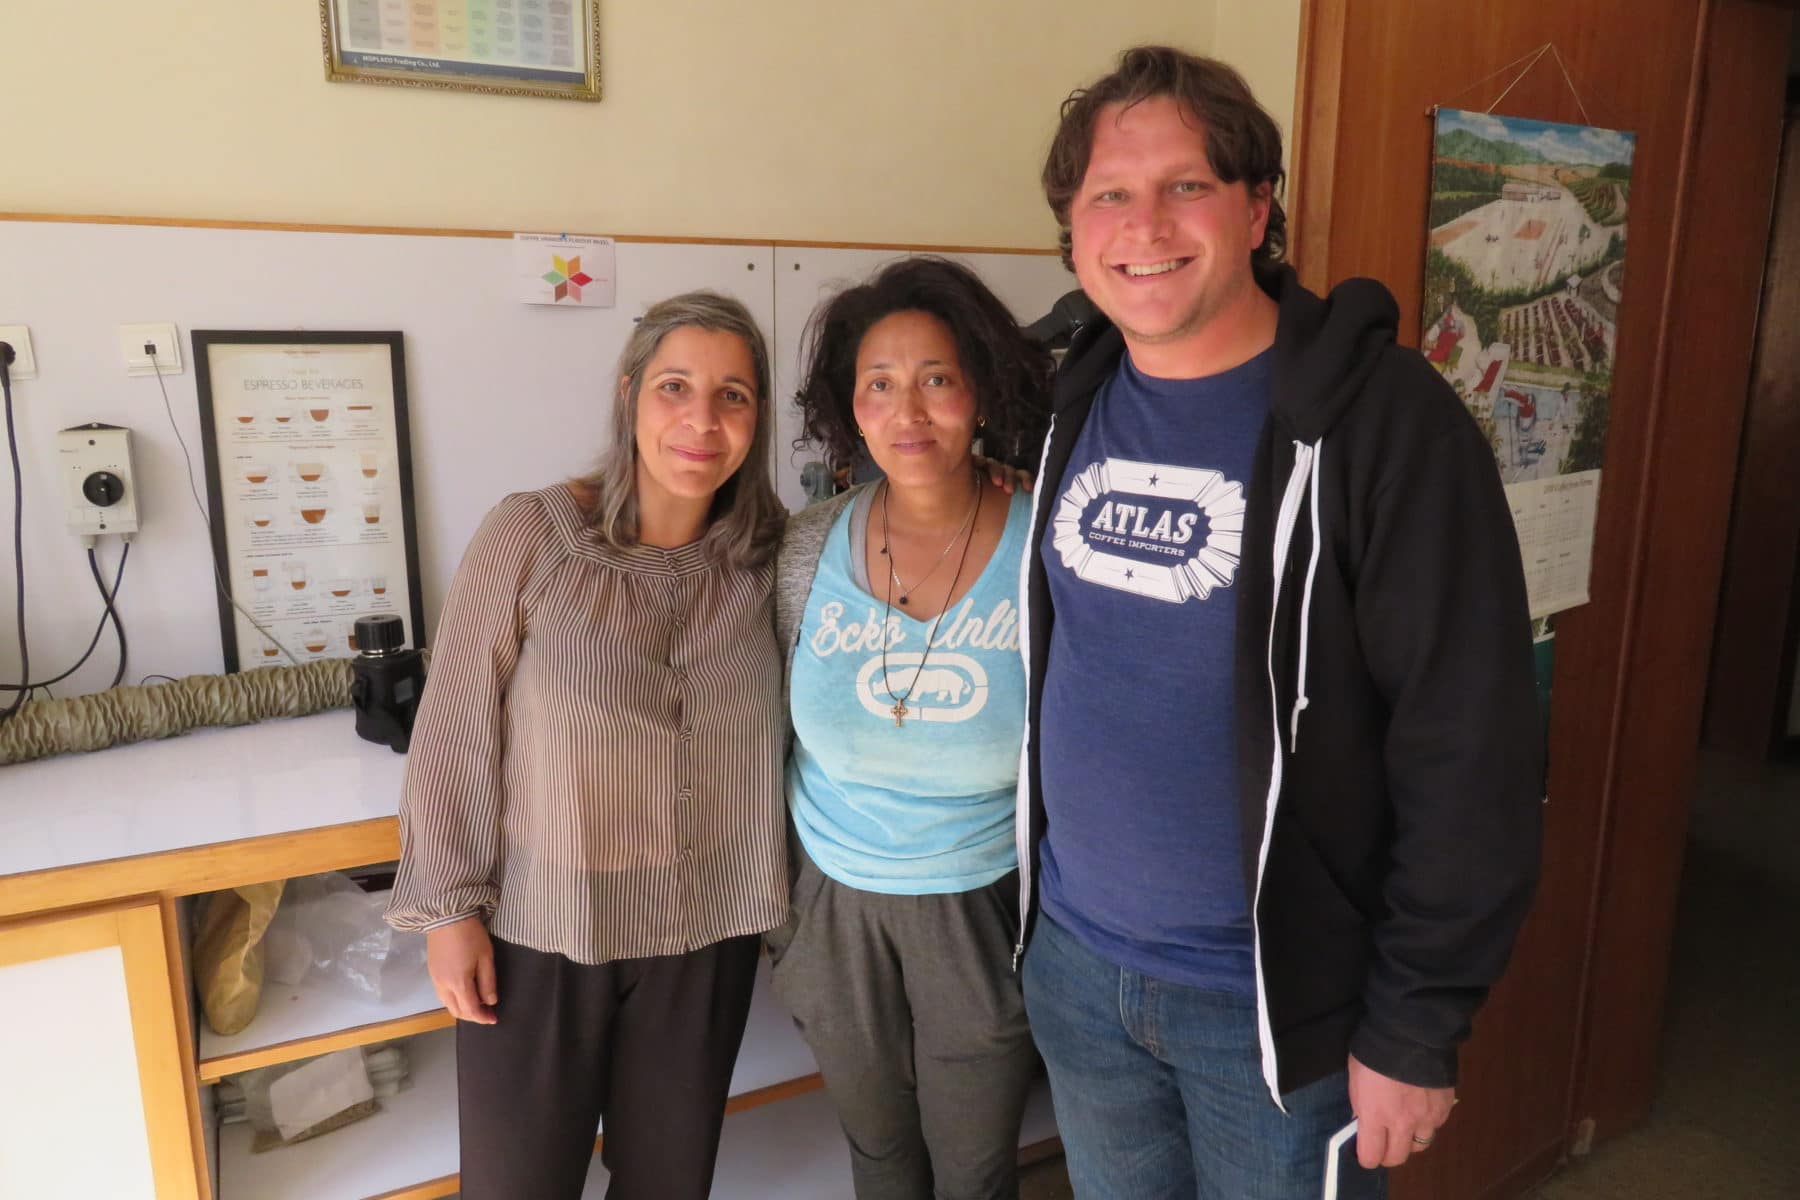 Blueprint member Mike Marquard poses with Heleanna Georgalis and Hana Kassahun Biligin of Moplaco, one of Blueprint's coffee sourcing partners in Ethiopia.